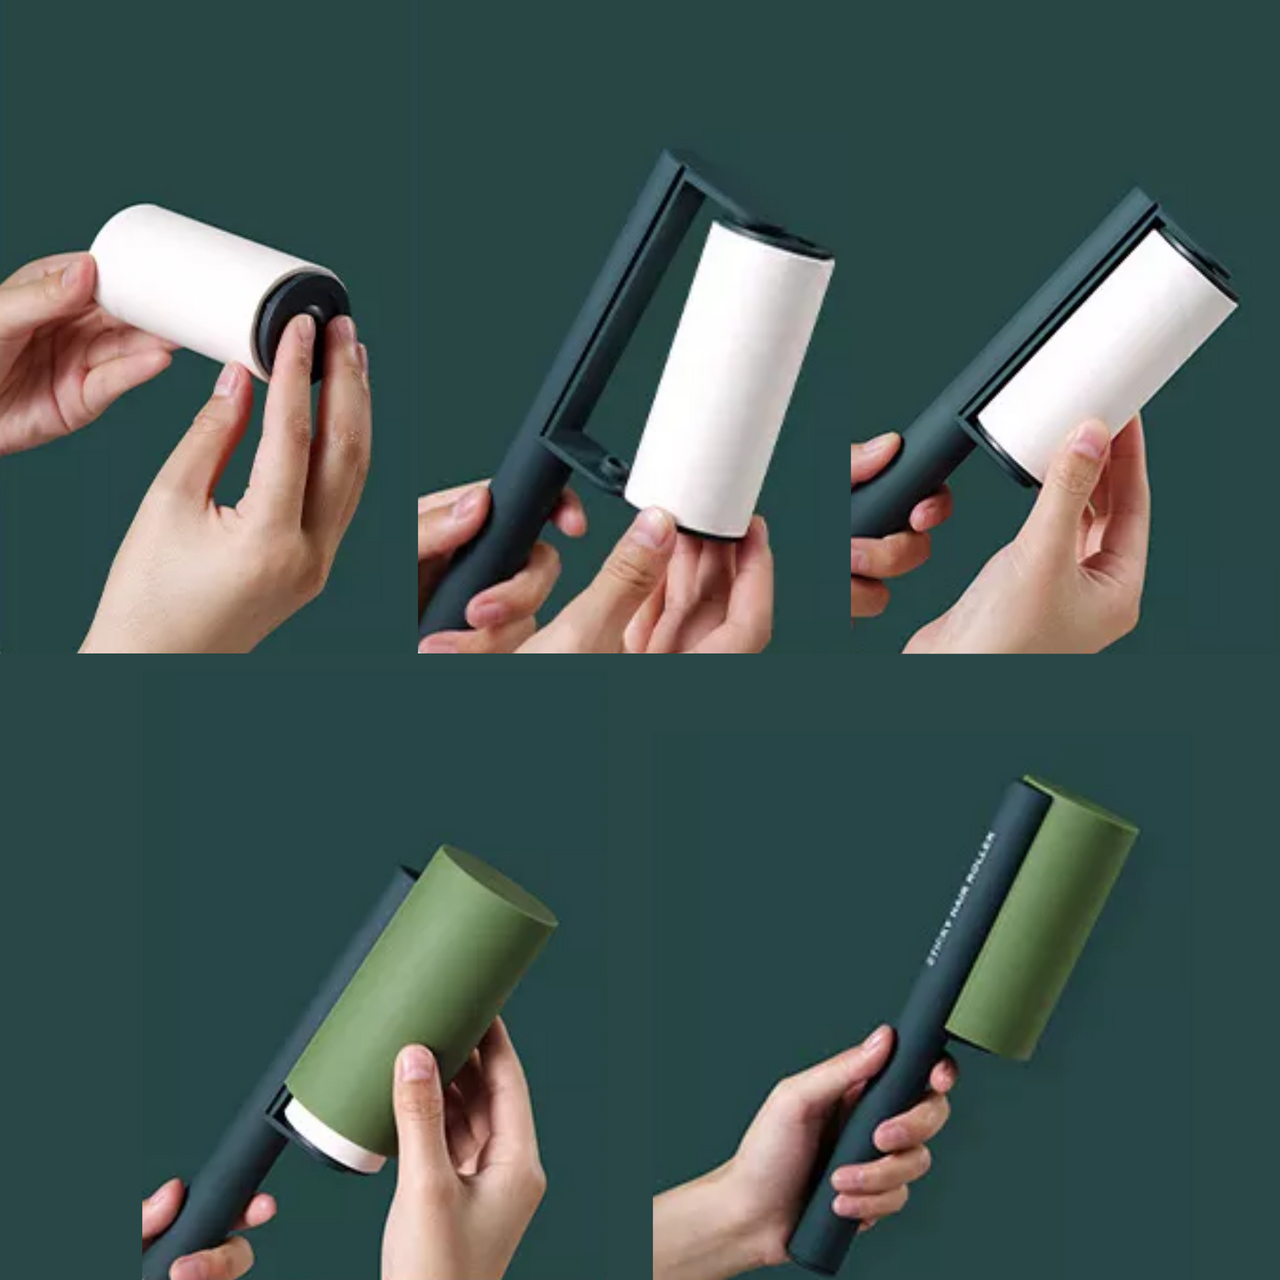 Sticky Hair Remover Lint Roller